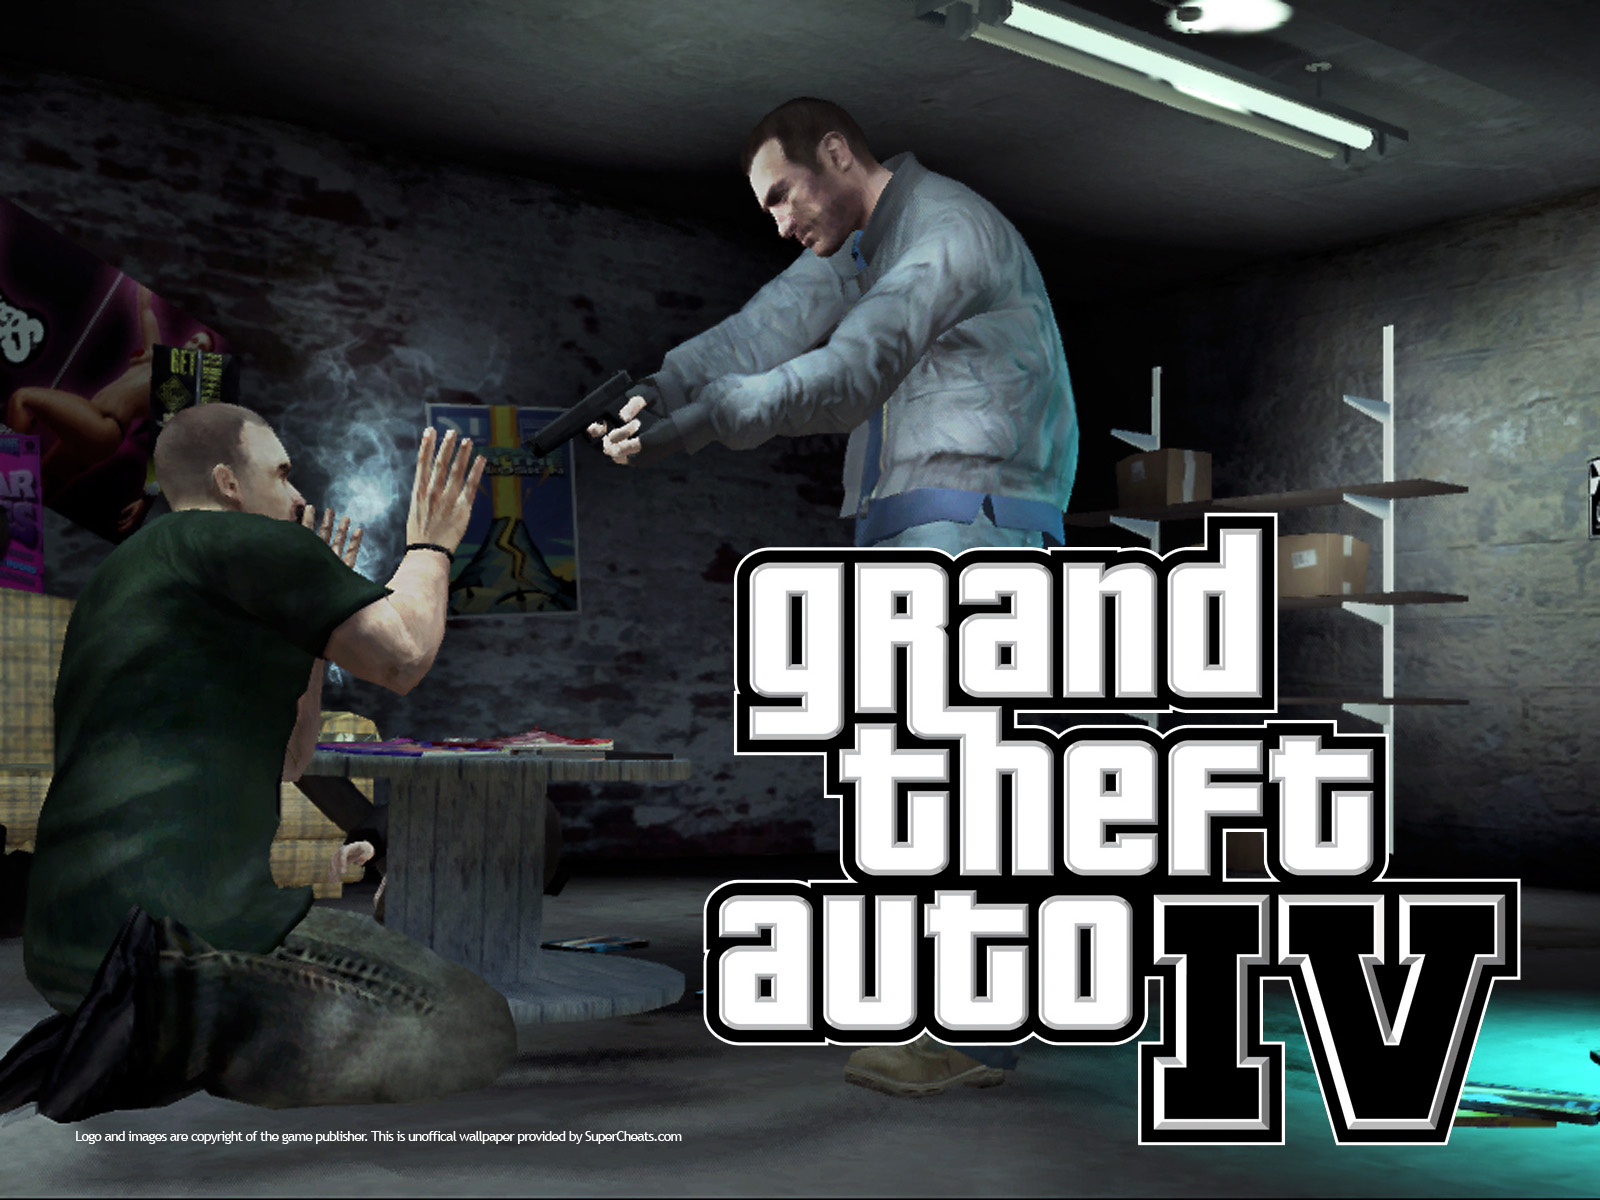 Grand Theft Auto 4 wallpapers. Grand Theft Auto 4. 2; Assassins Creed